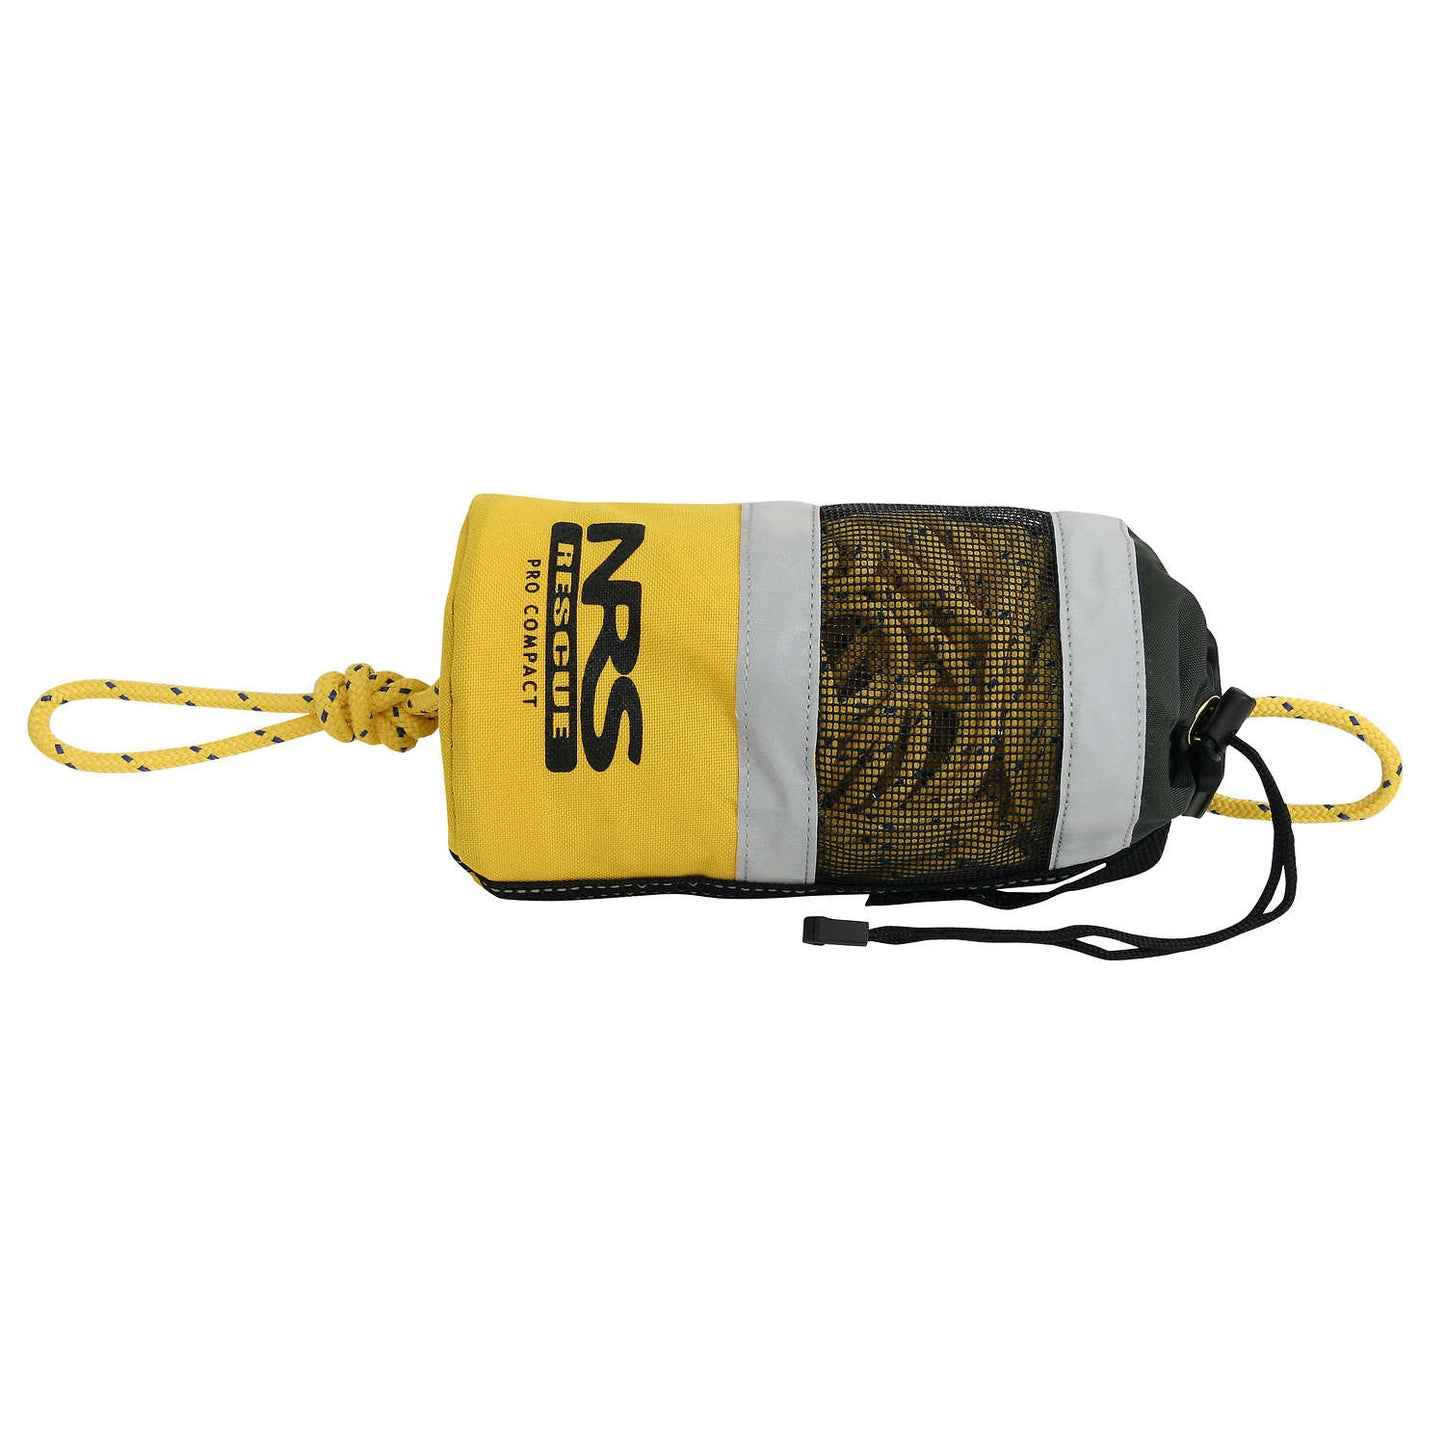 NRS Pro Compact Rescue Throw Bag